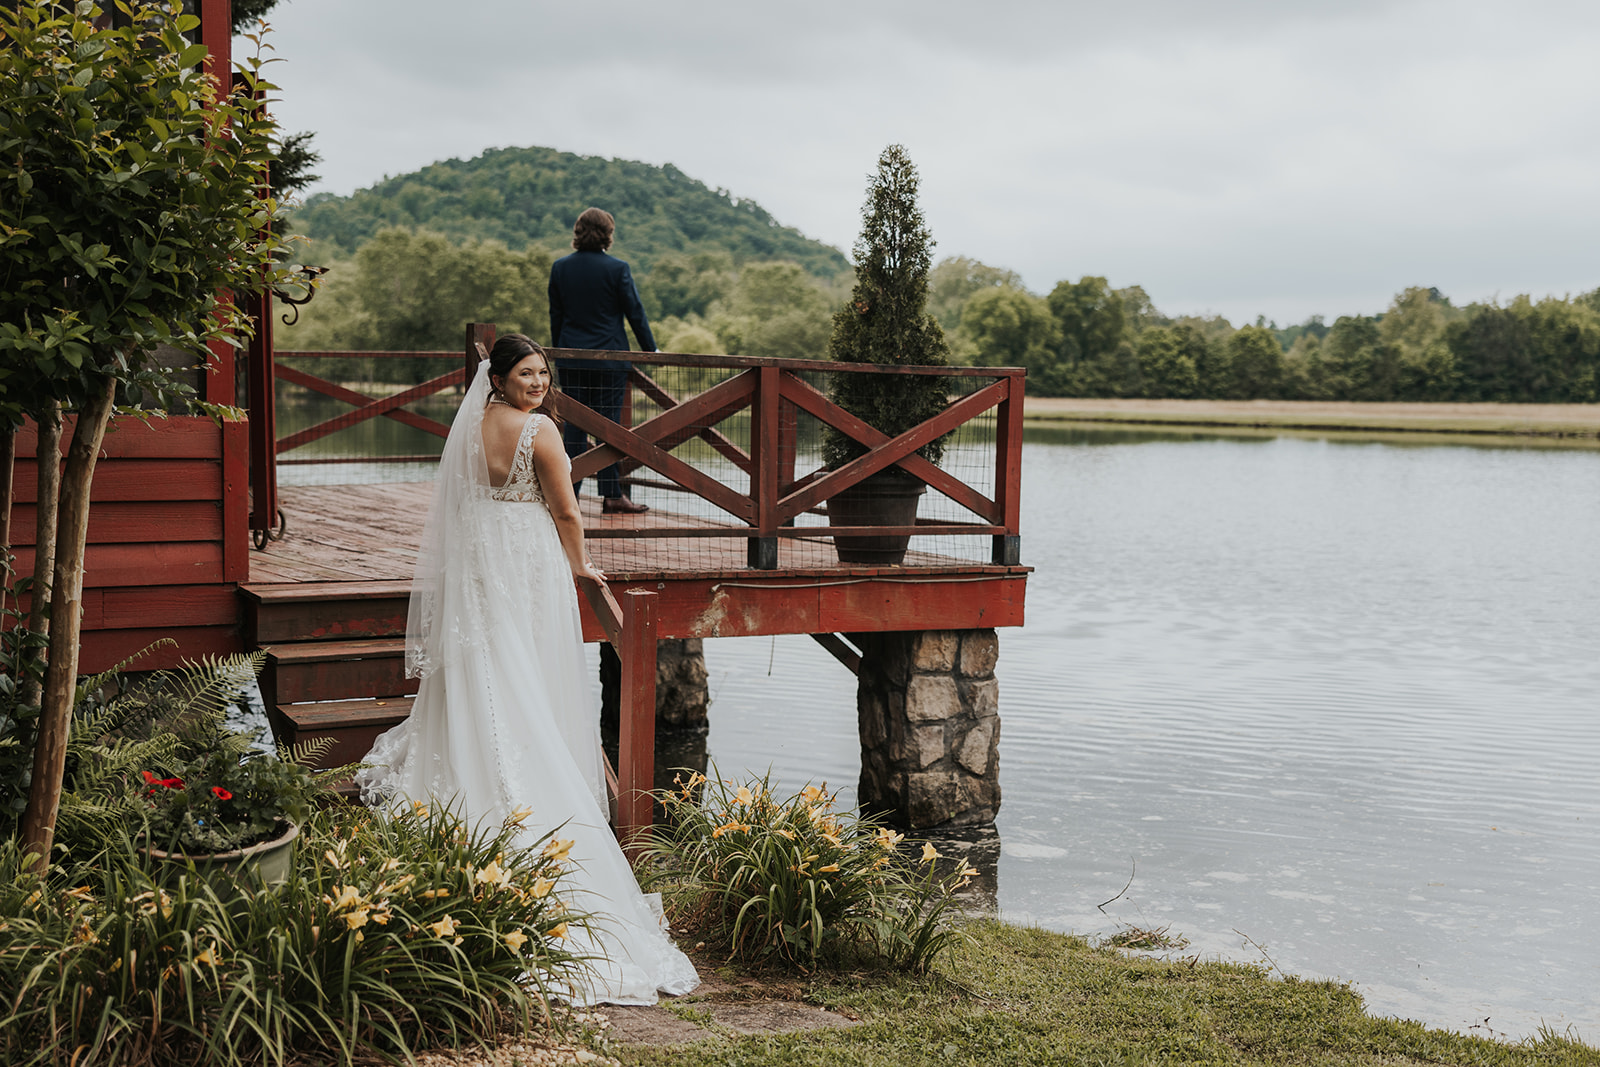 Bride at lake in front of red building. 